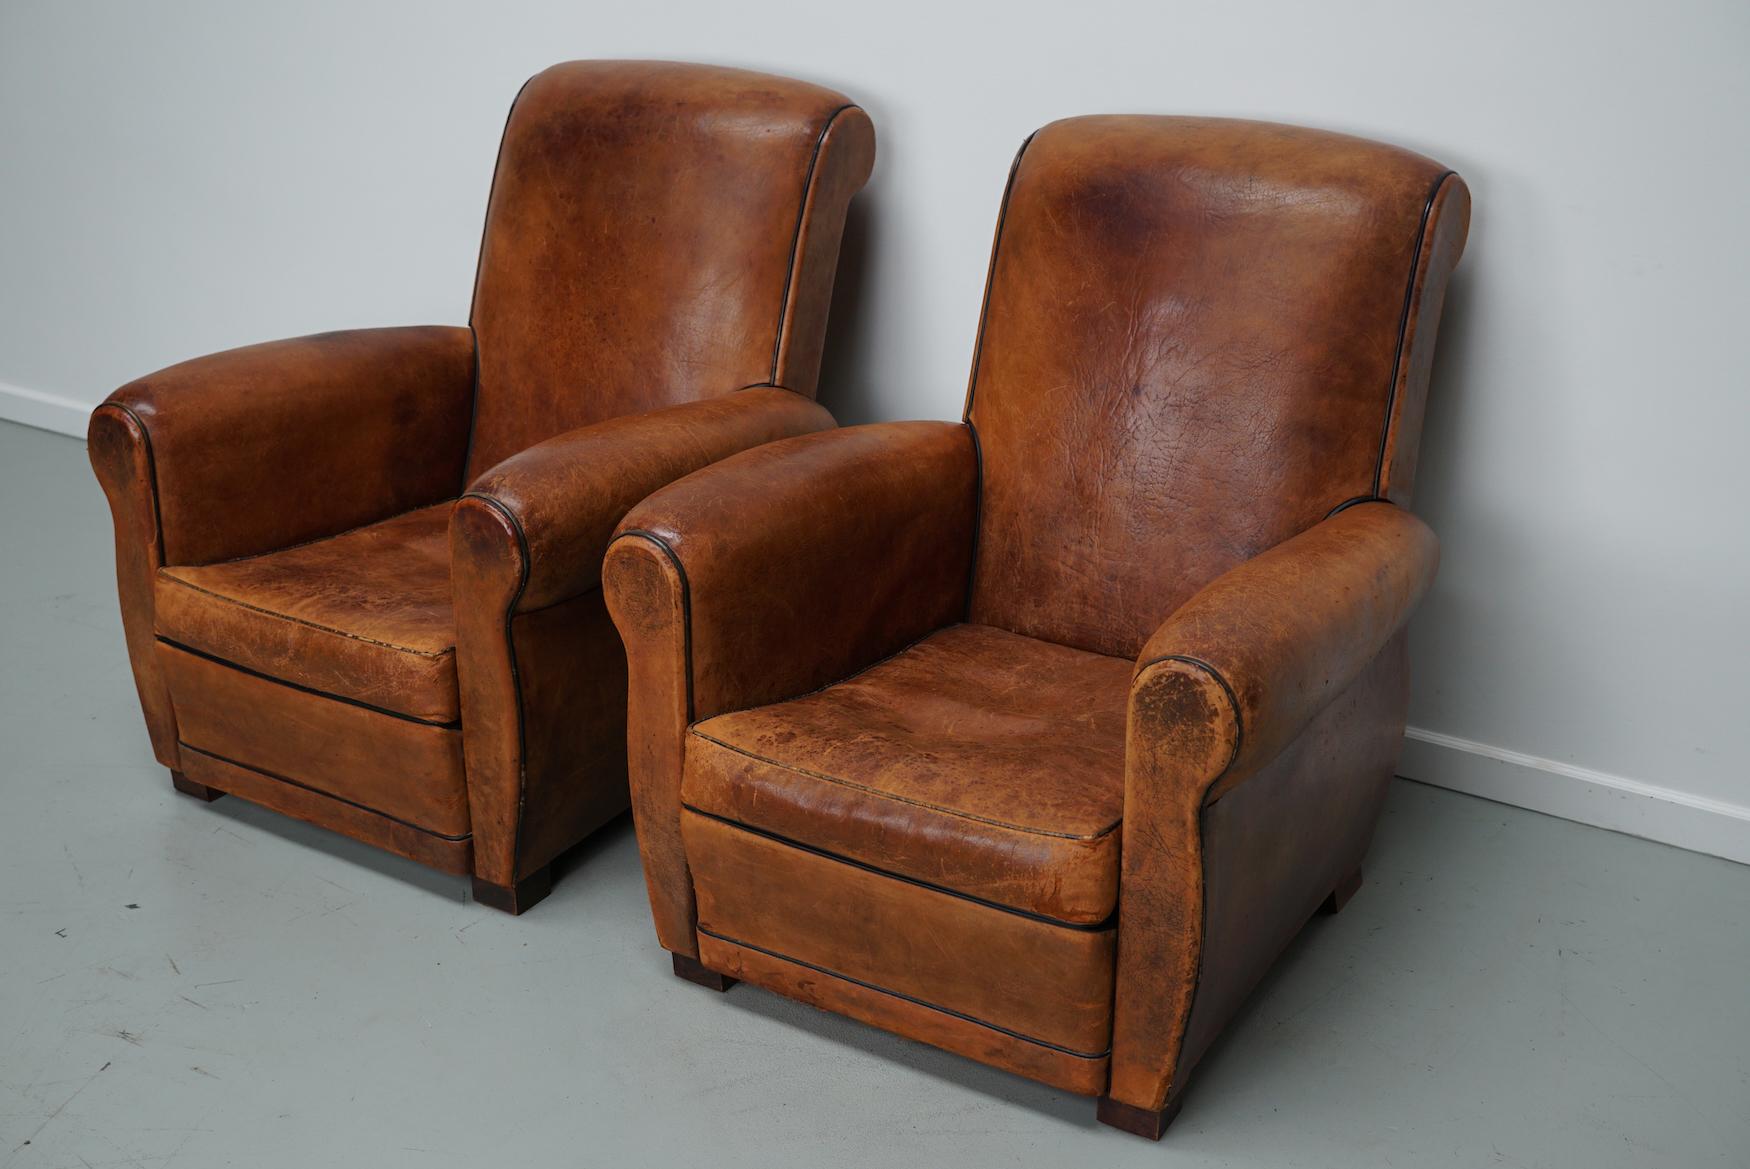  Pair of Vintage French Cognac Leather Club Chairs, Set of 2 2